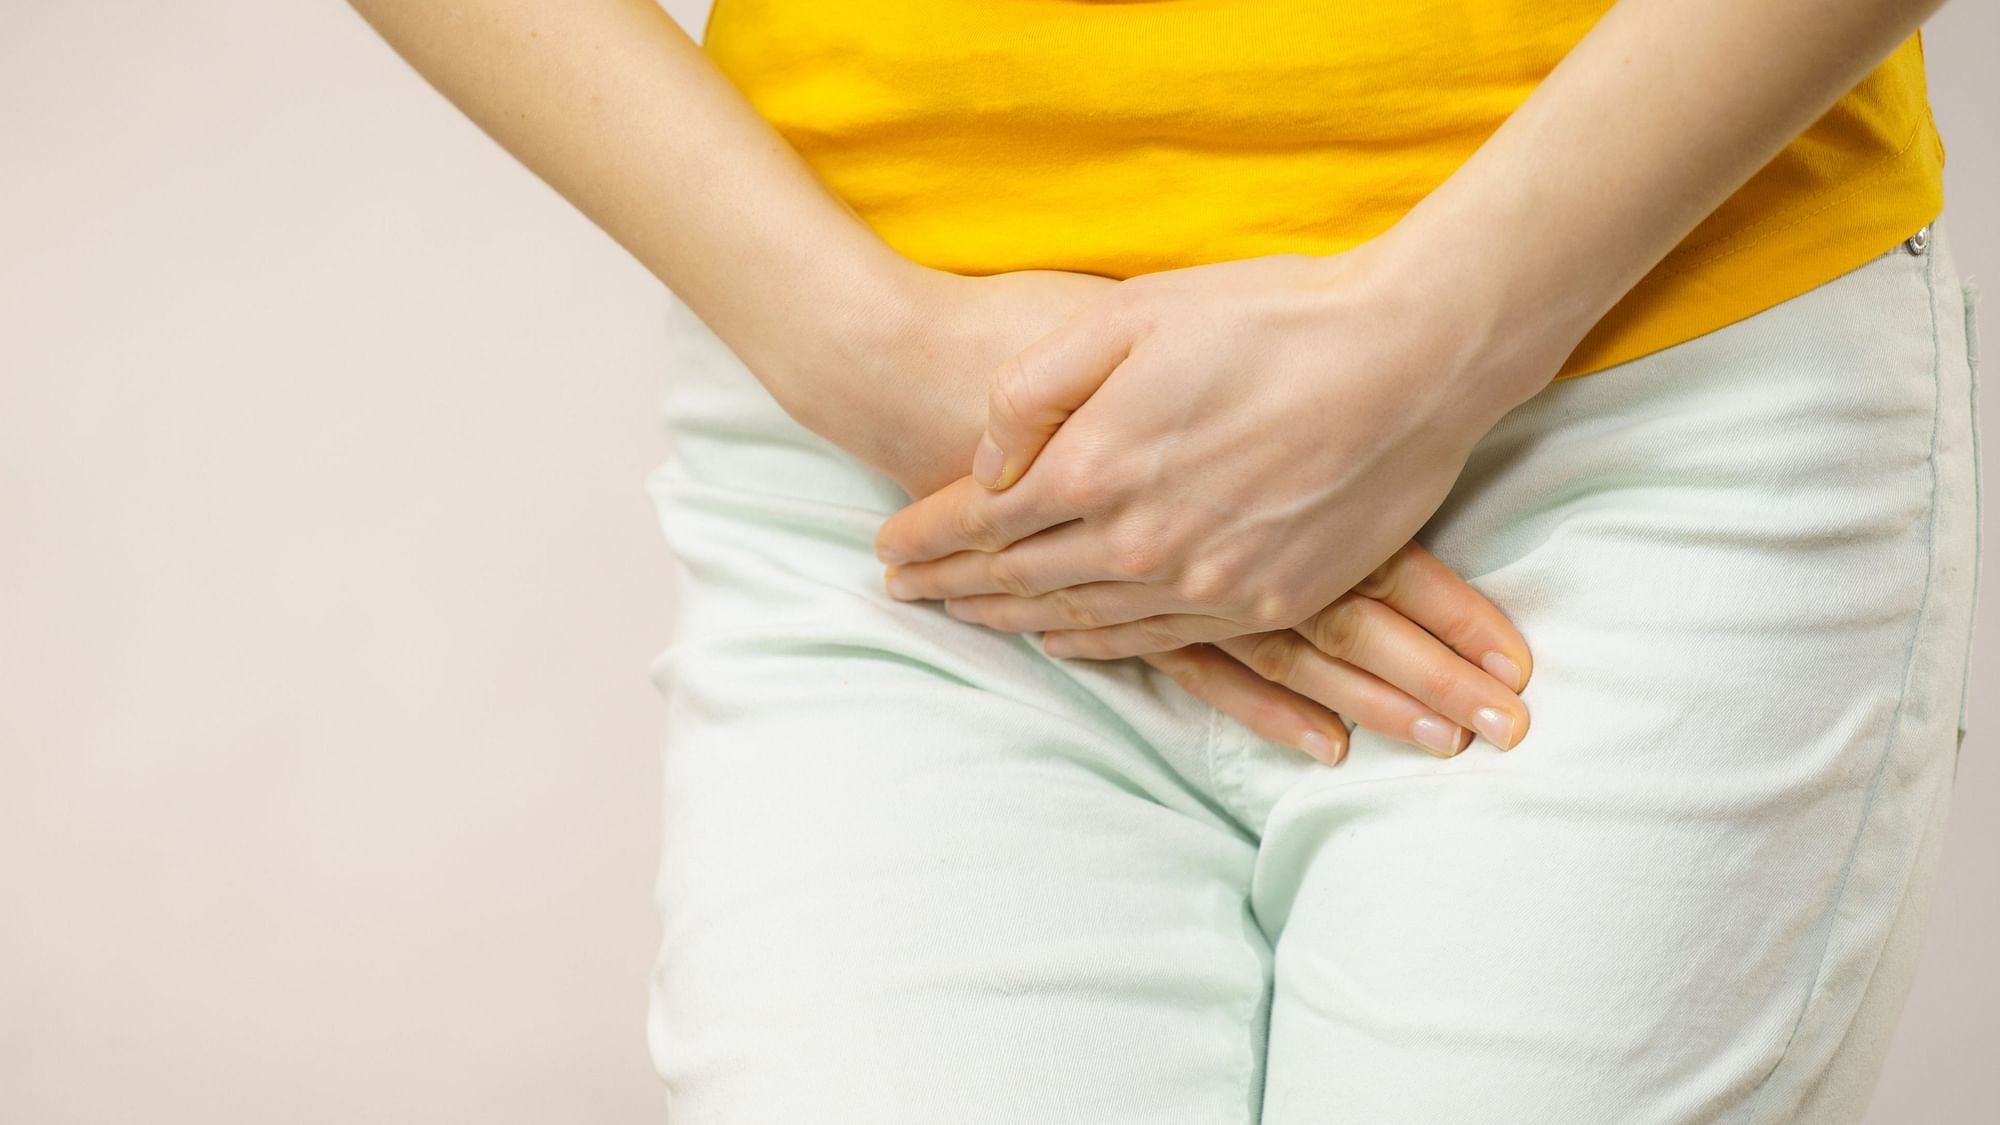 Urinary tract infections (UTIs) are among the most common bacterial infections found in humans, affecting more than 150 million people worldwide.